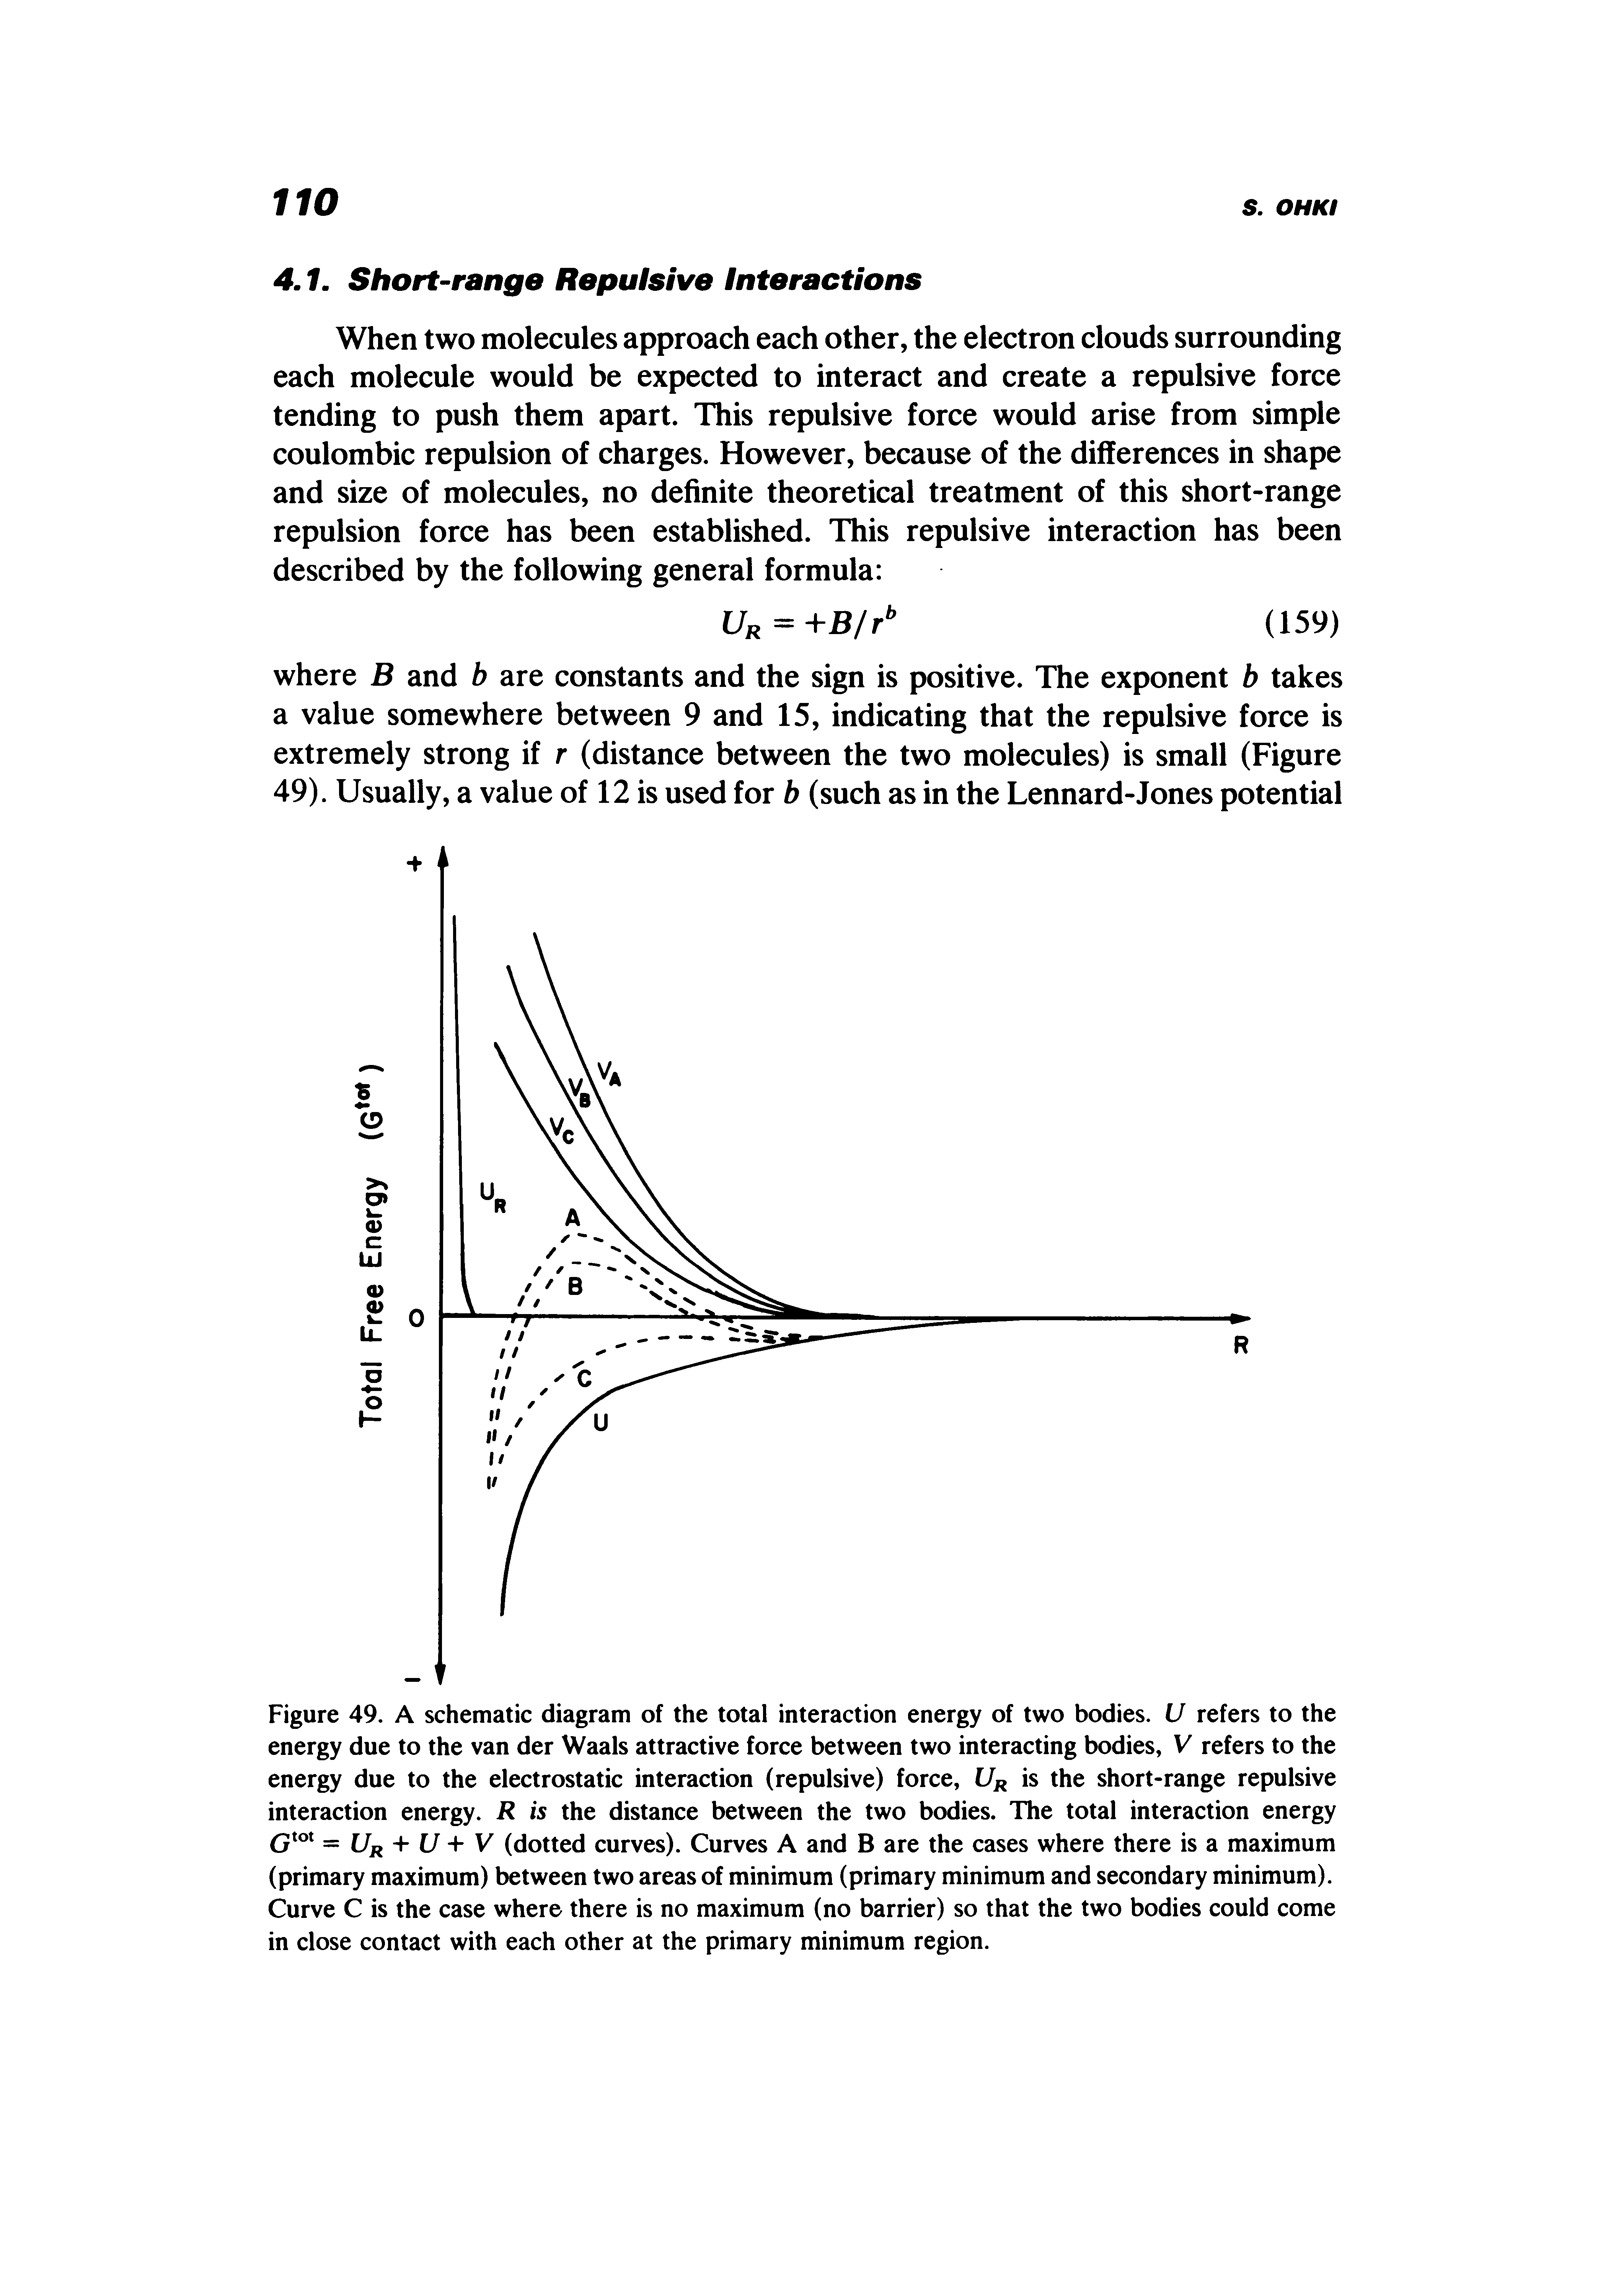 Figure 49. A schematic diagram of the total interaction energy of two bodies. U refers to the energy due to the van der Waals attractive force between two interacting bodies, V refers to the energy due to the electrostatic interaction (repulsive) force, is the short-range repulsive interaction energy. R is the distance between the two bodies. The total interaction energy = L/r + 1/ + V (dotted curves). Curves A and B are the cases where there is a maximum (primary maximum) between two areas of minimum (primary minimum and secondary minimum). Curve C is the case where there is no maximum (no barrier) so that the two bodies could come in close contact with each other at the primary minimum region.